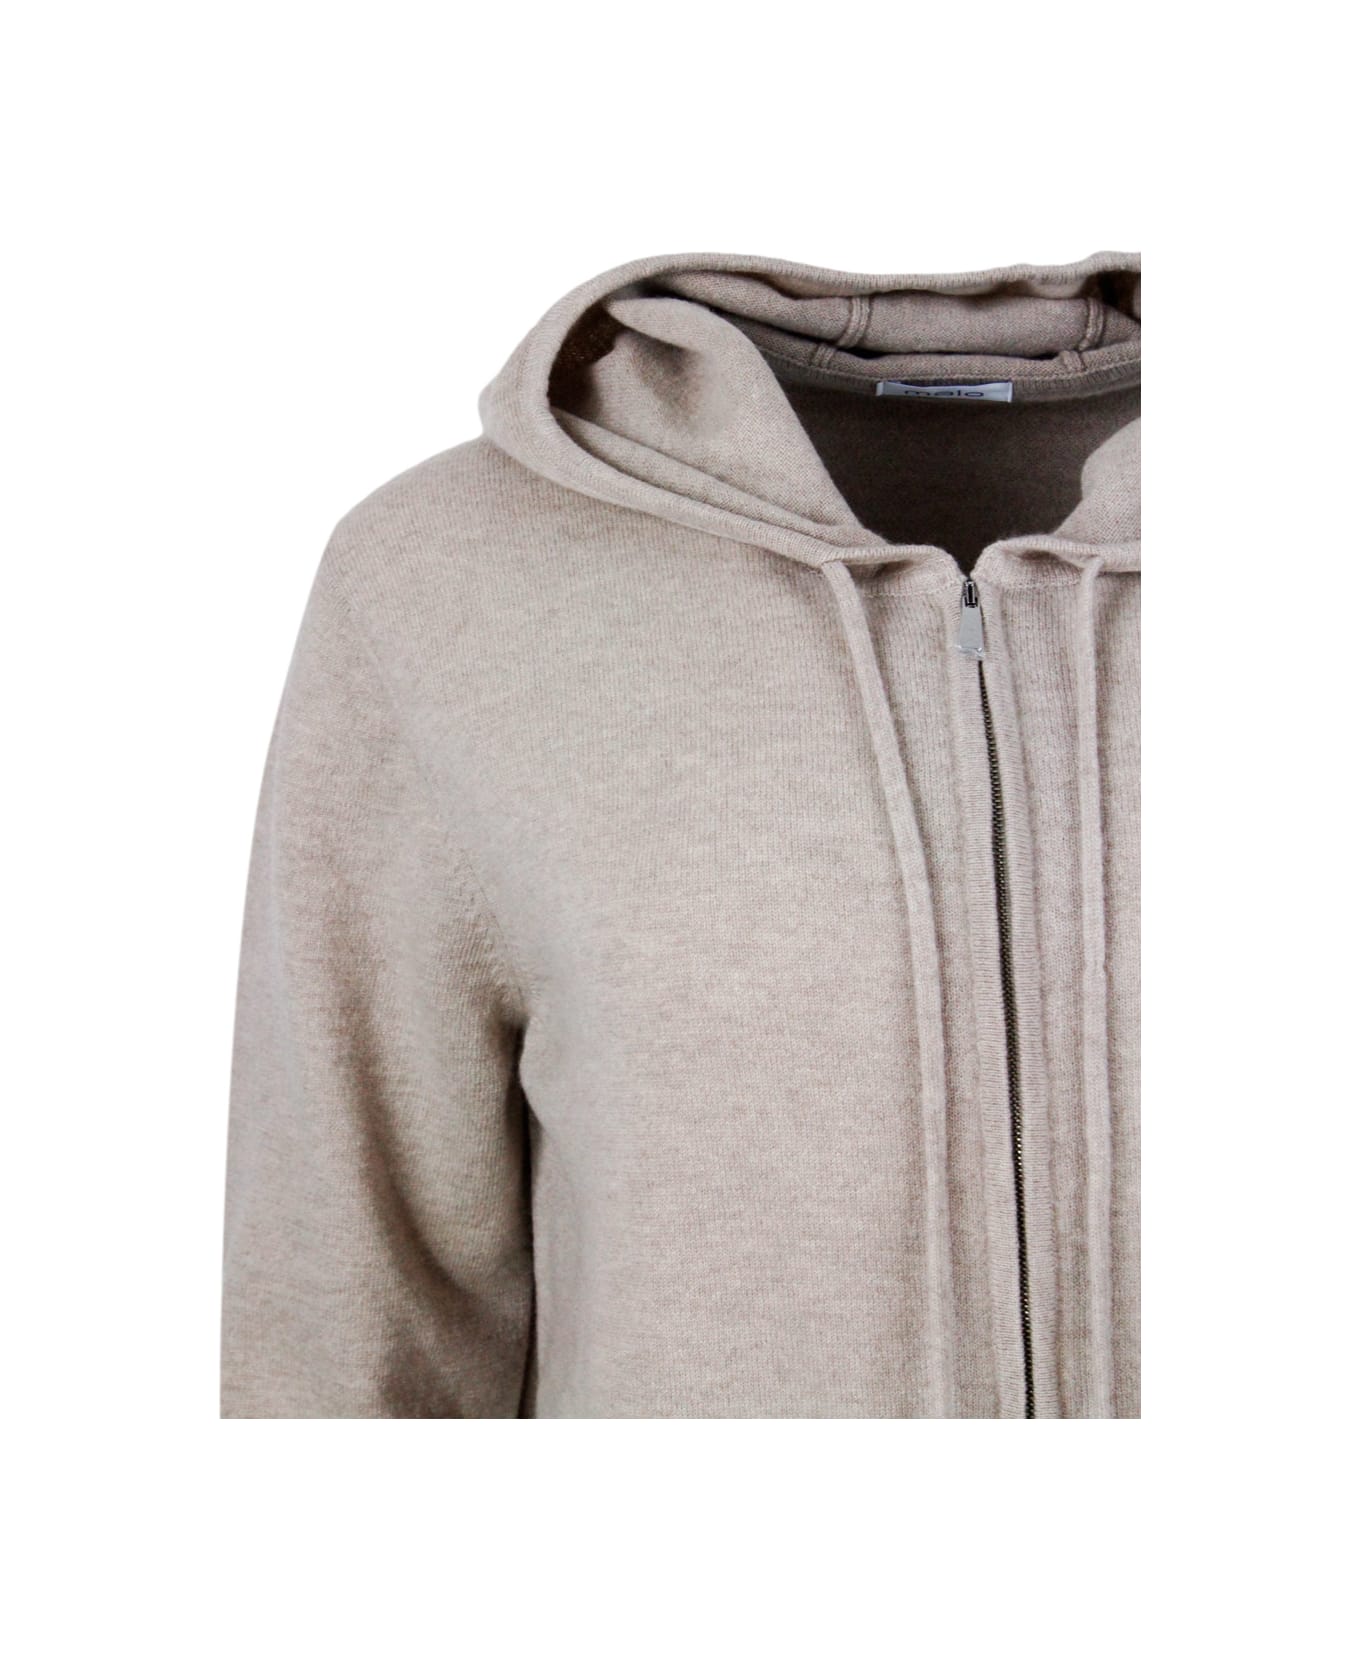 Malo Sweatshirt Style Sweater In Pure And Soft Cashmere With Hood And Zip Closure - Beige